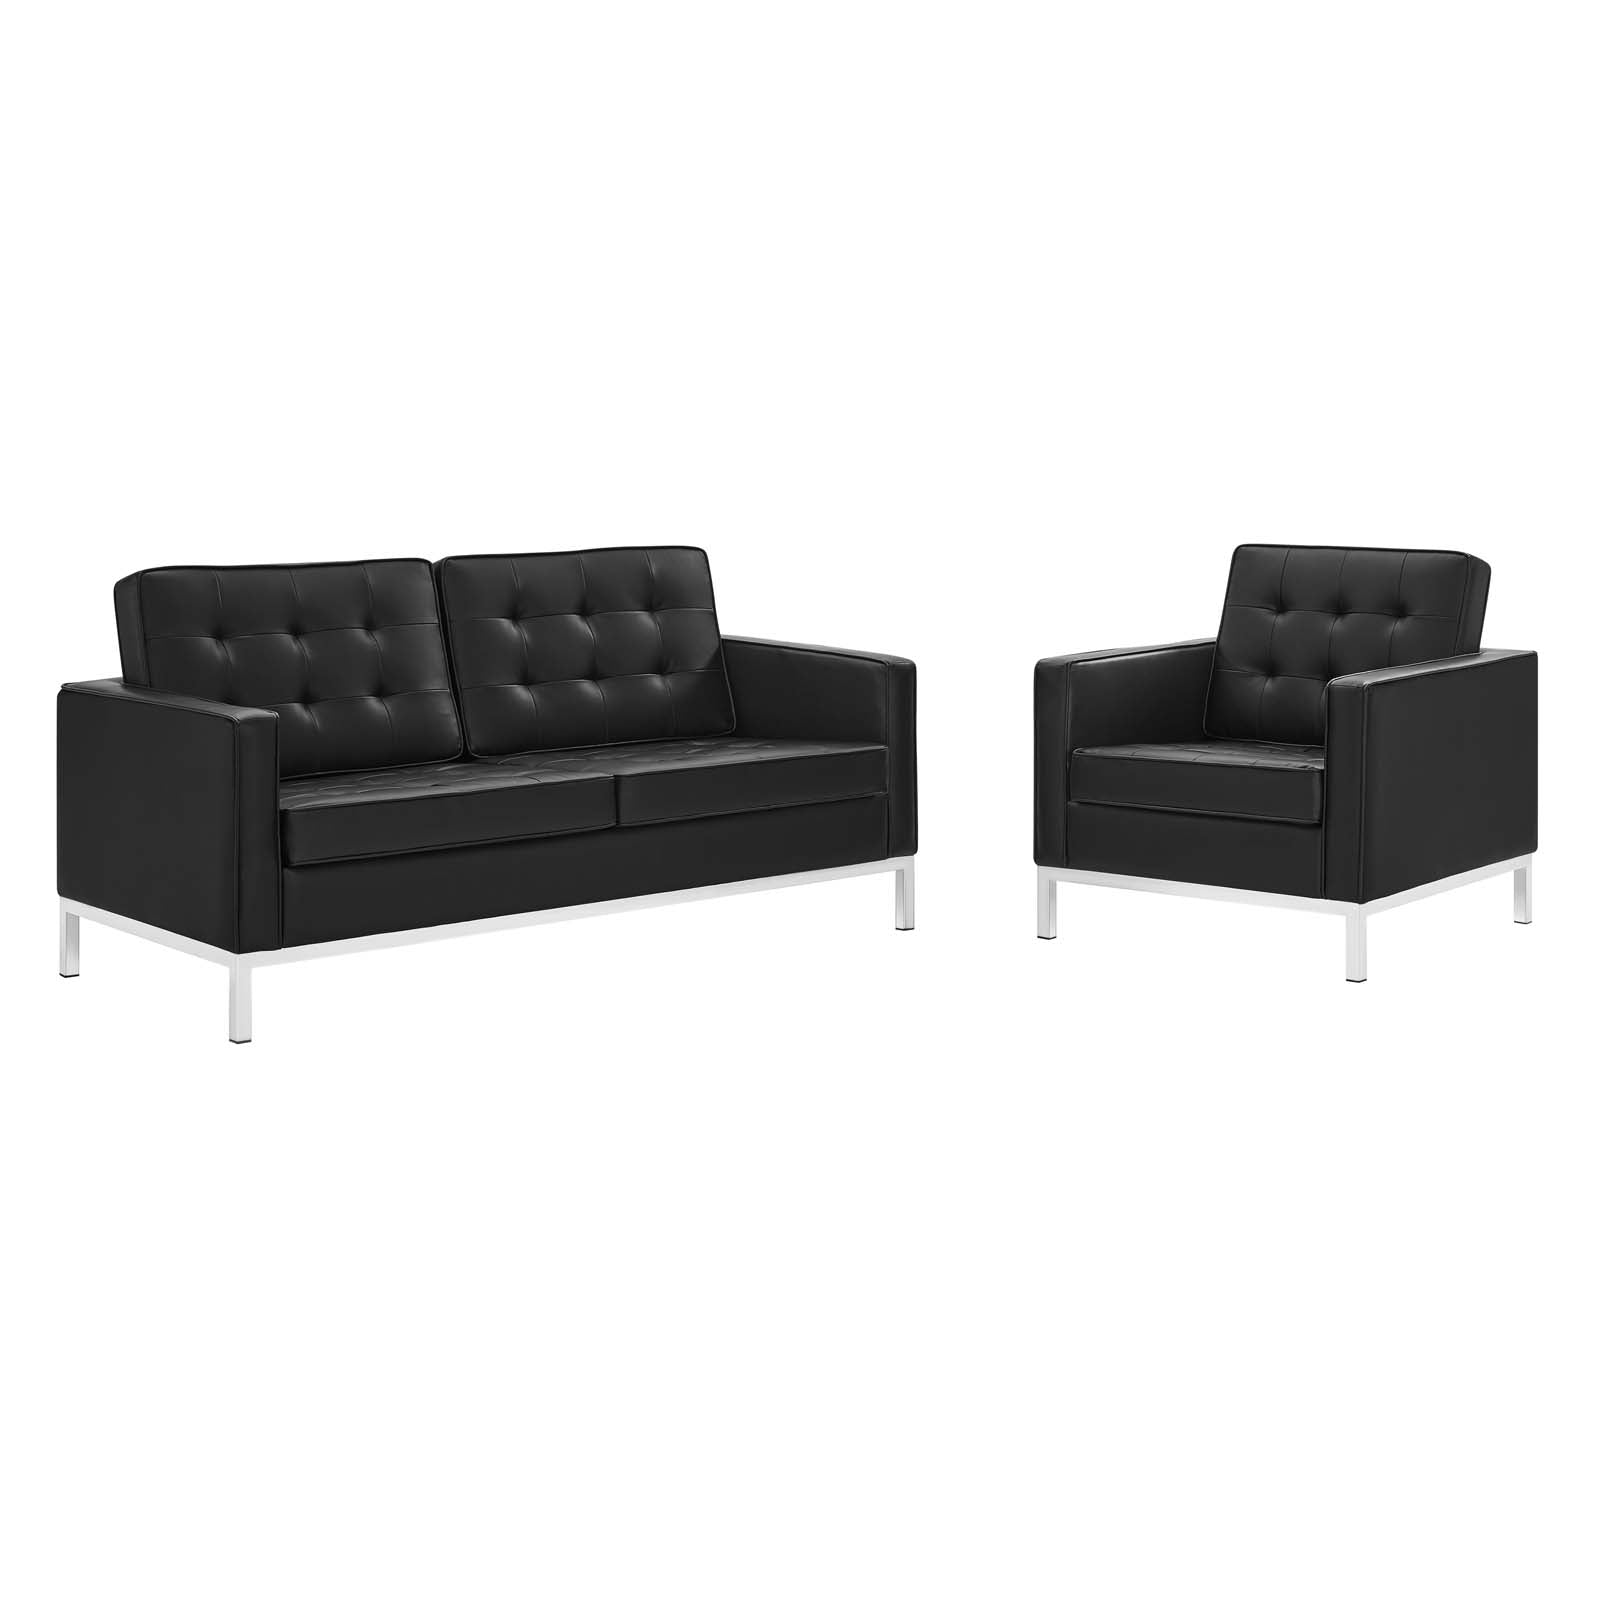 Loft Tufted Upholstered Faux Leather Loveseat and Armchair Set